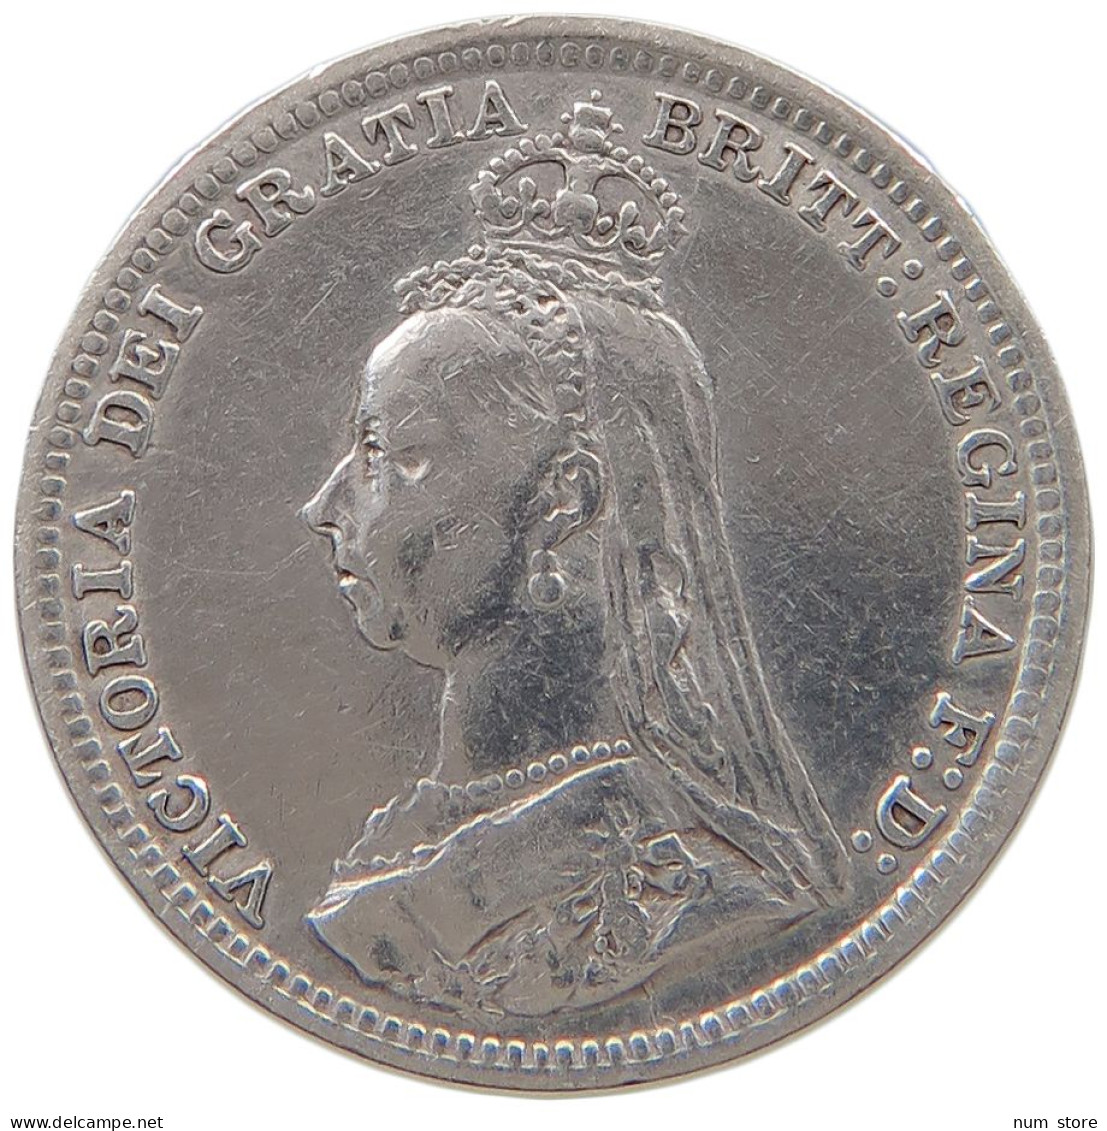 GREAT BRITAIN THREEPENCE 1891 Victoria 1837-1901 #t157 0731 - F. 3 Pence